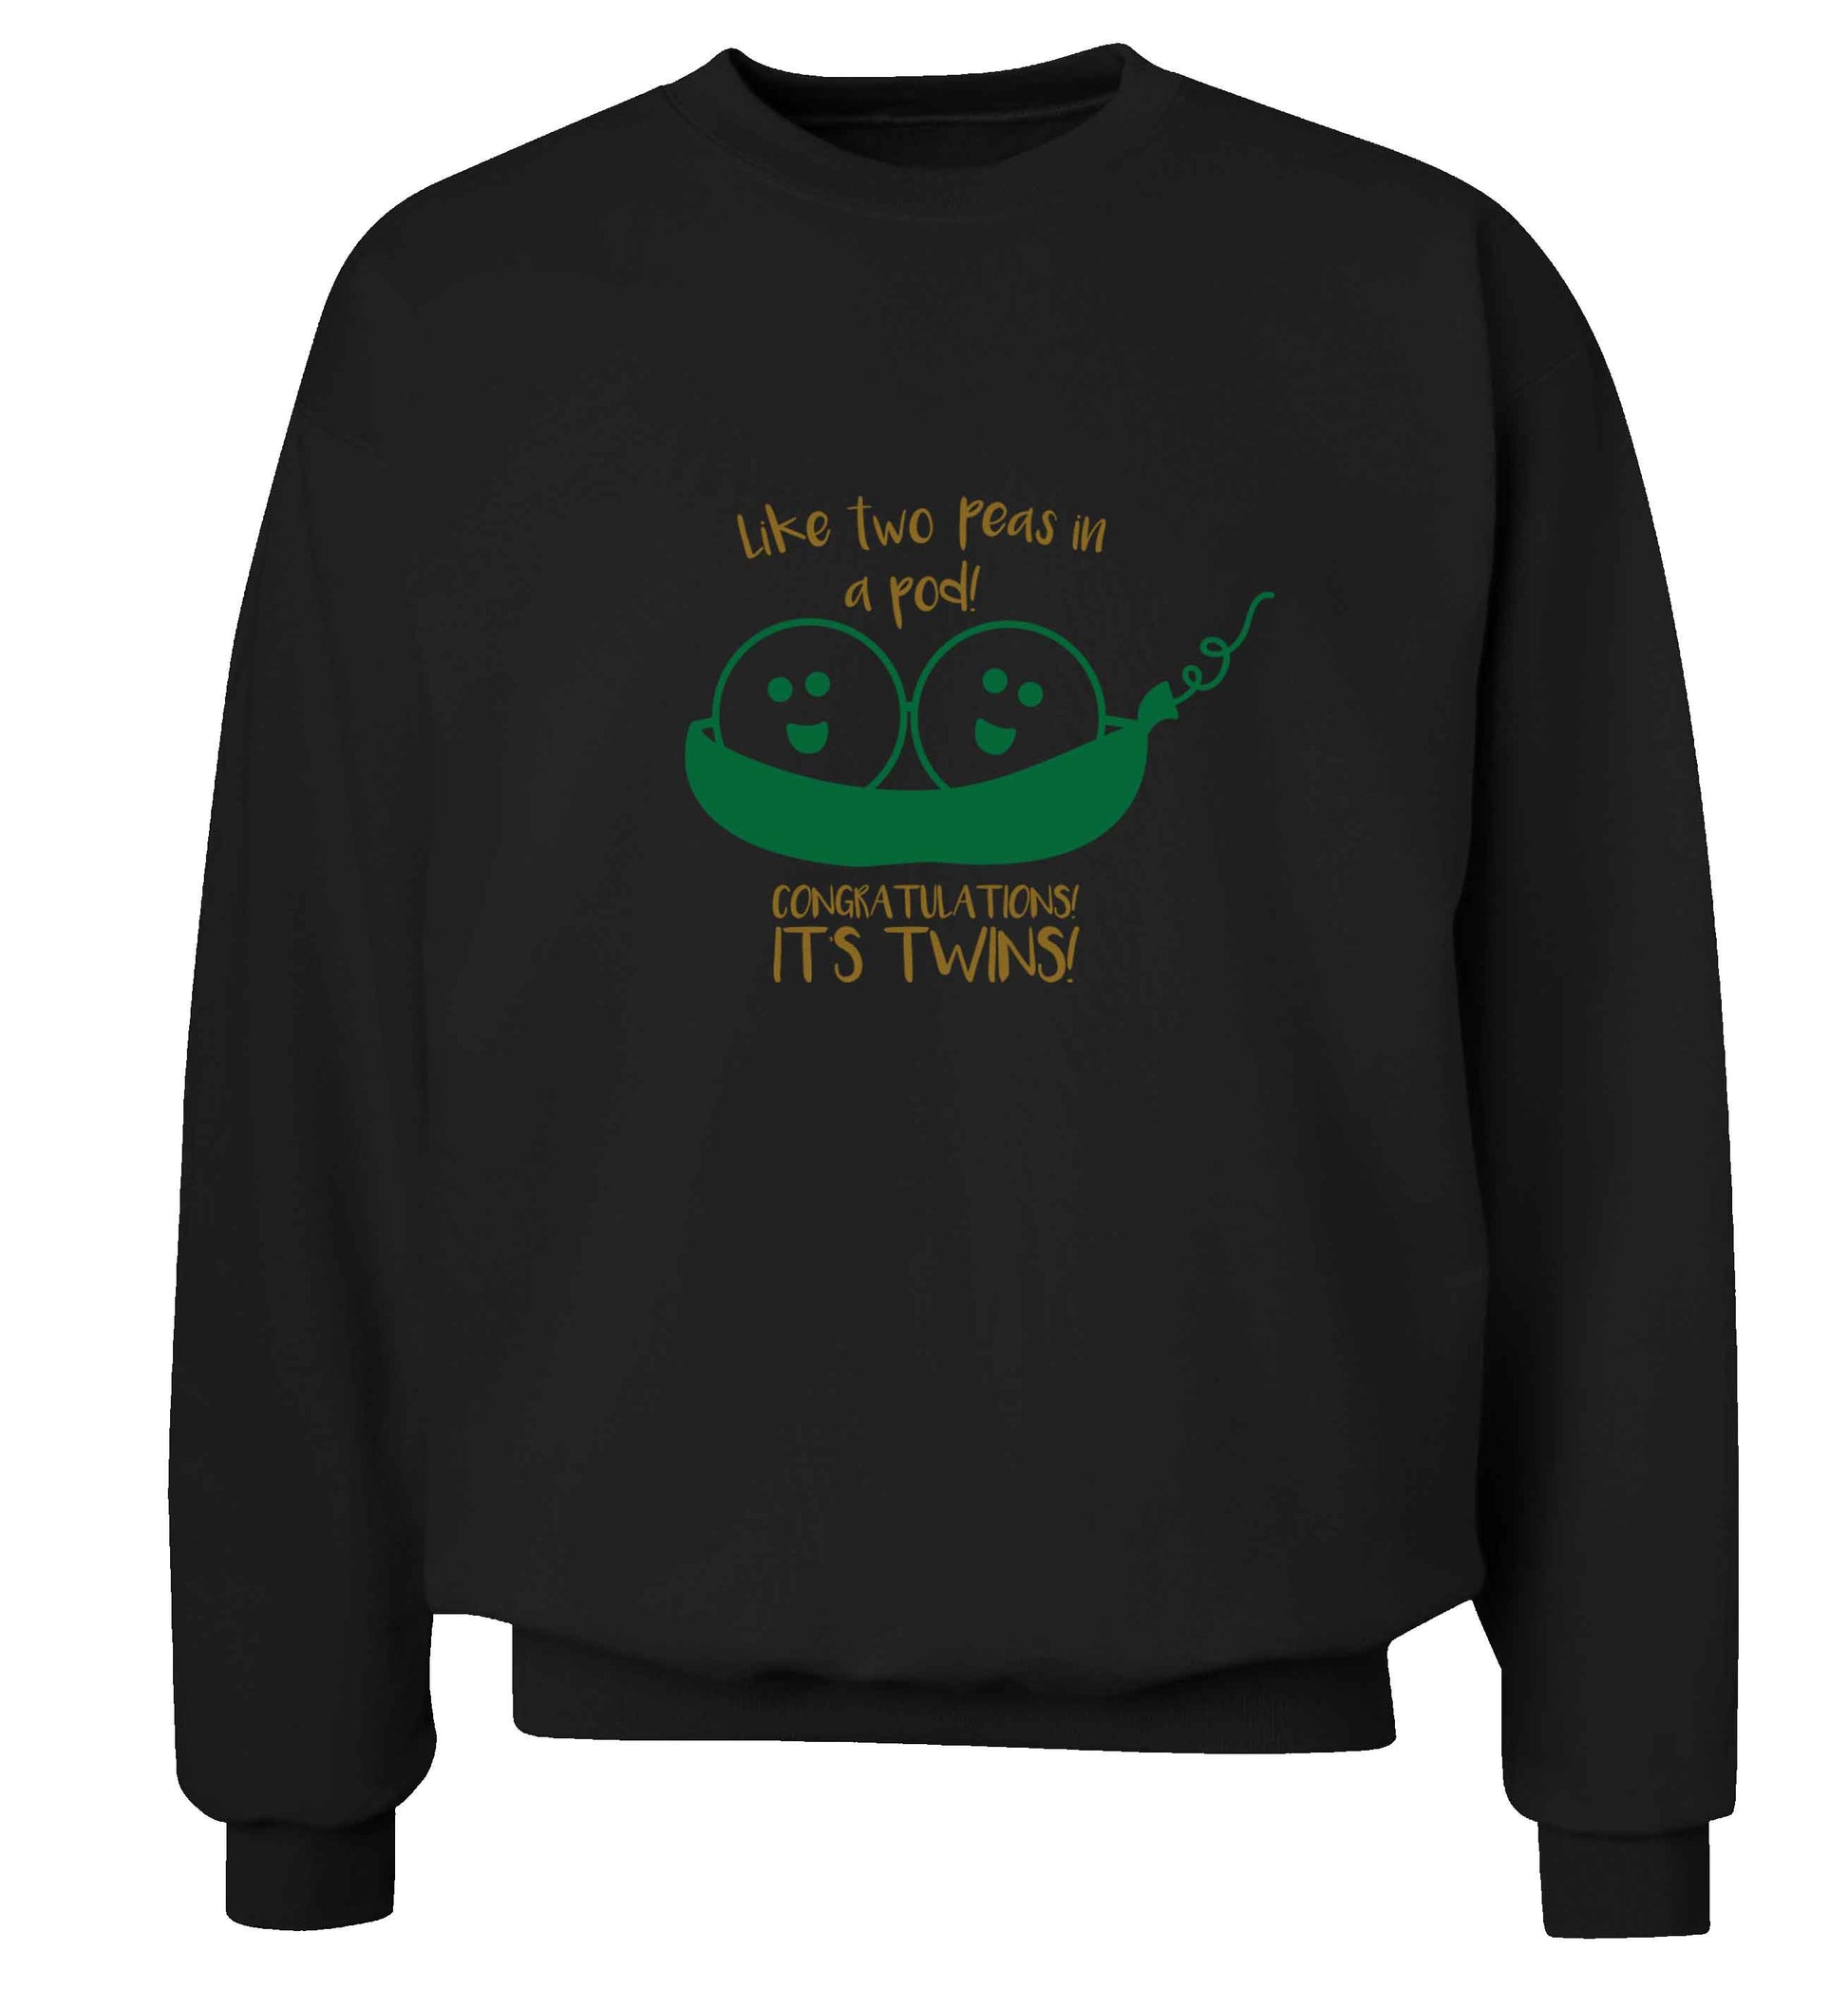 Like two peas in a pod! Congratulations it's twins! adult's unisex black sweater 2XL